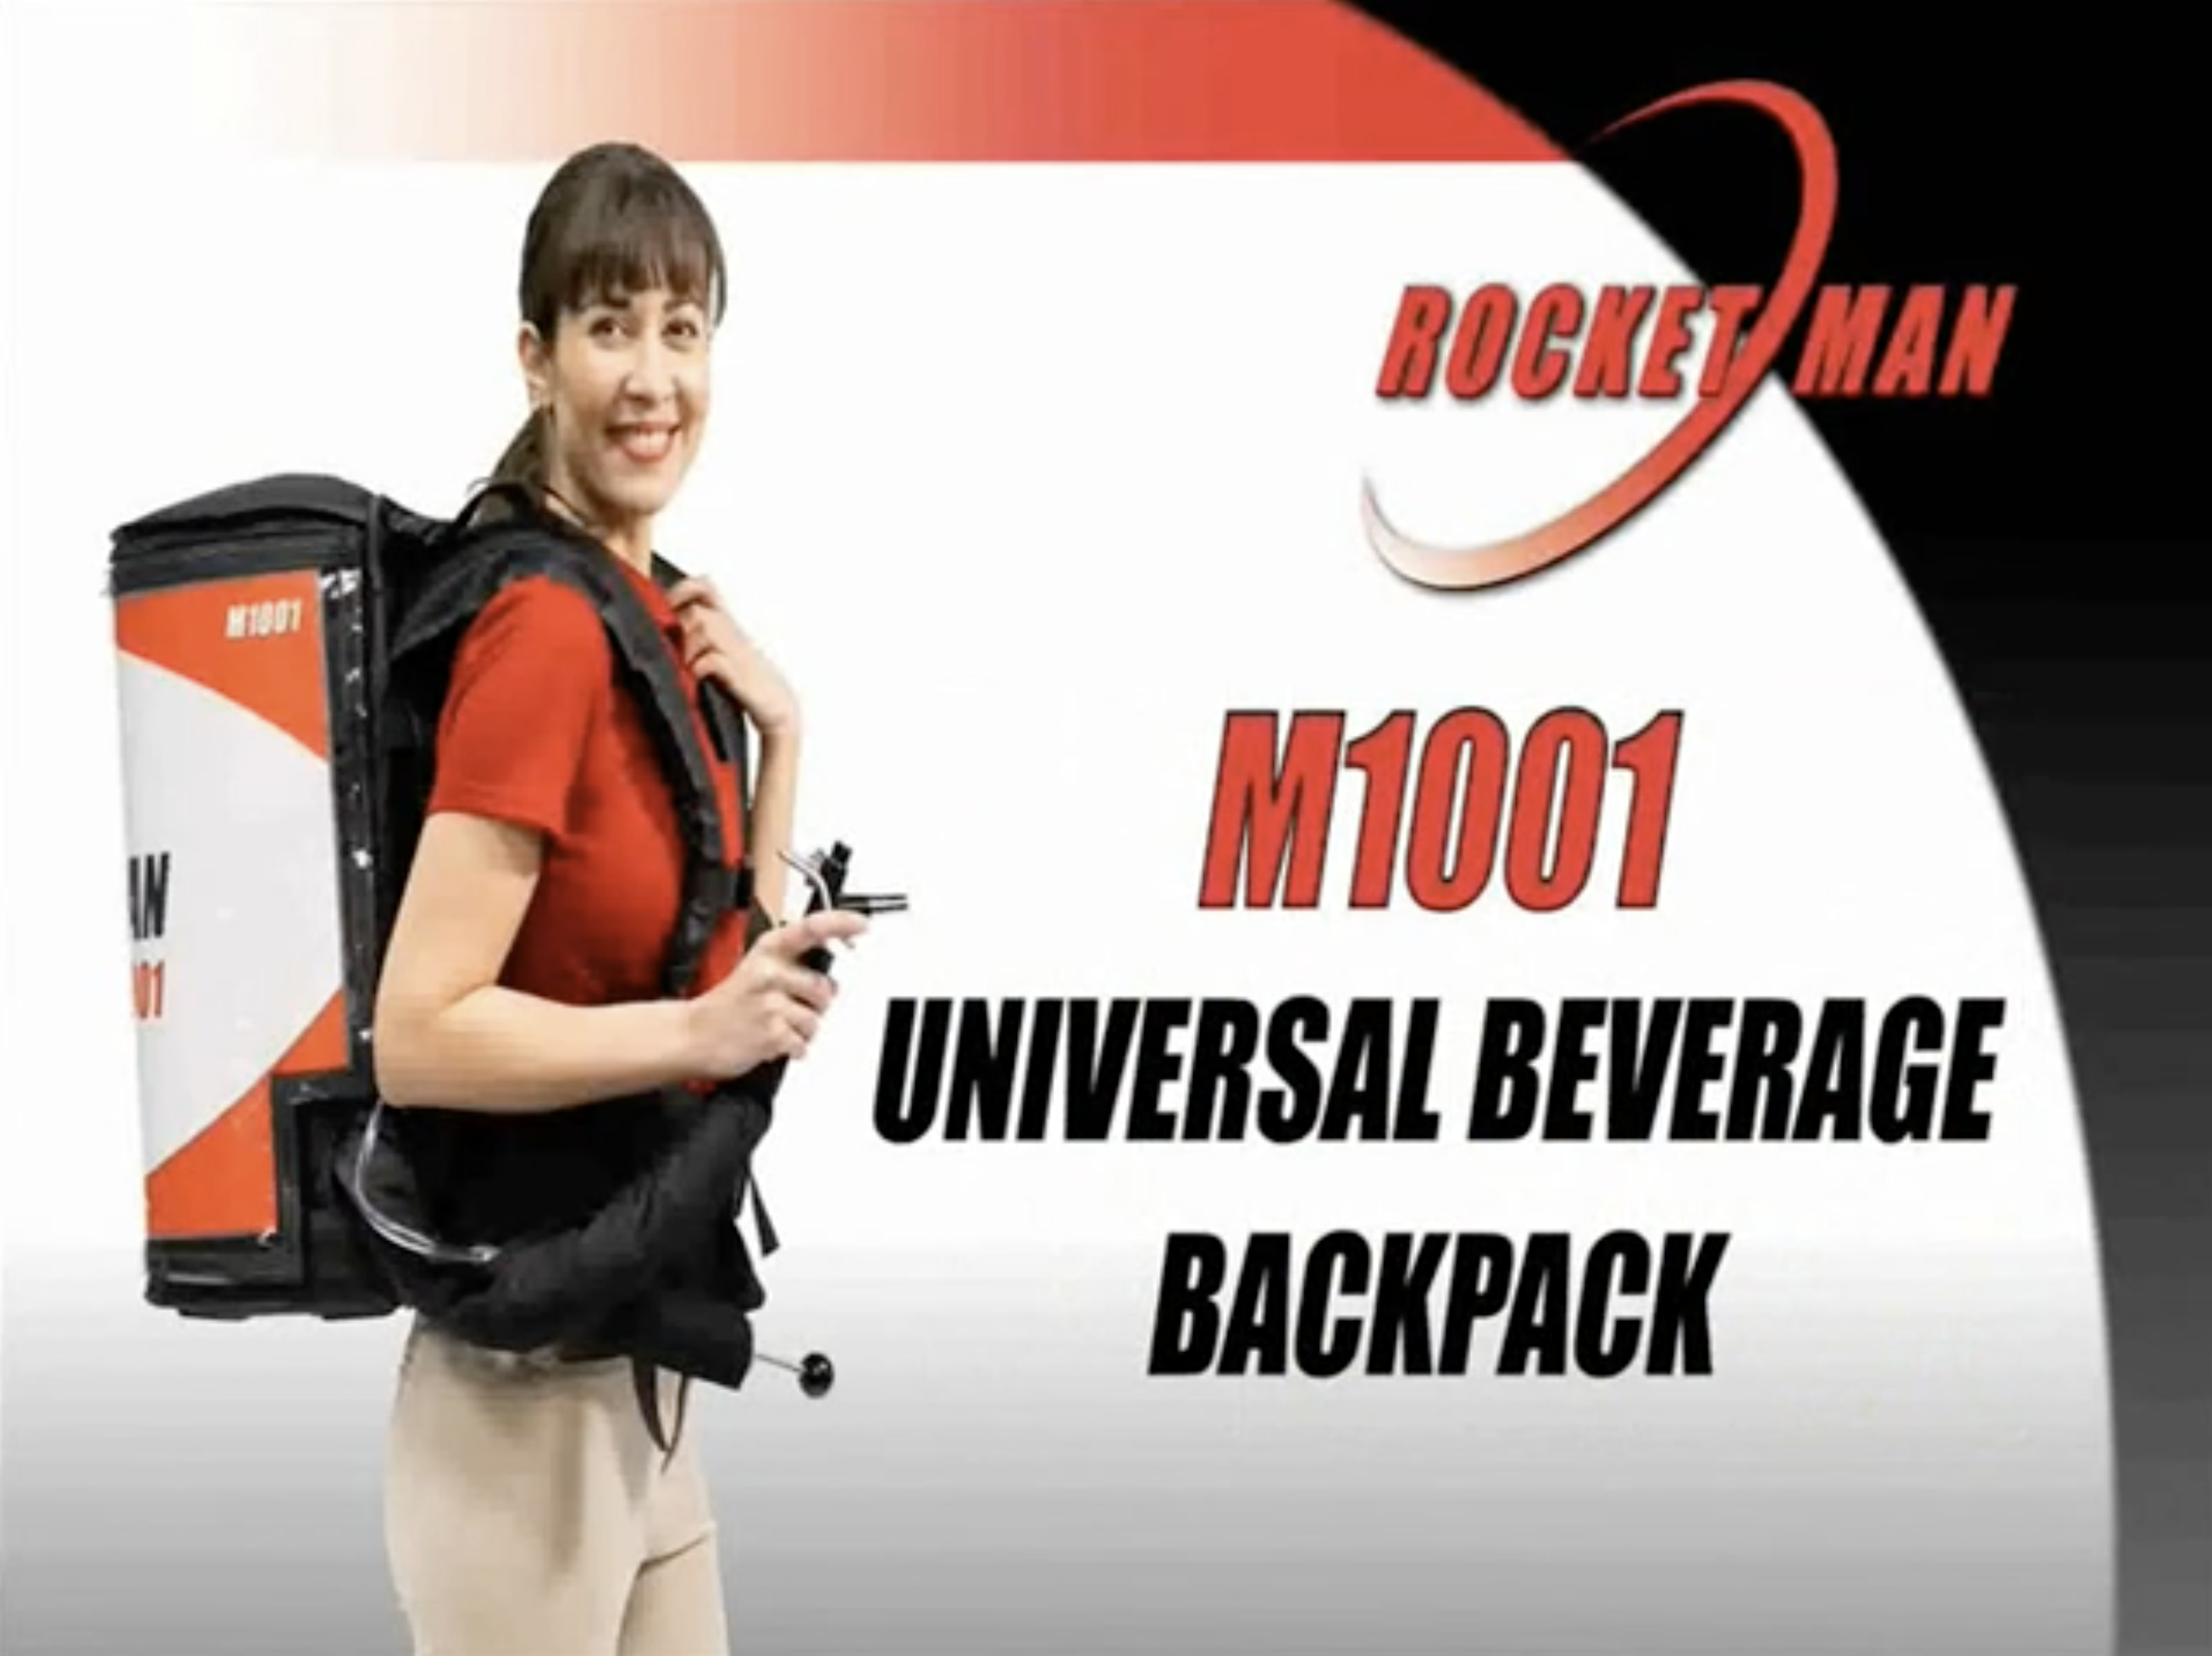 Mobile Drink Systems - rockect man plus